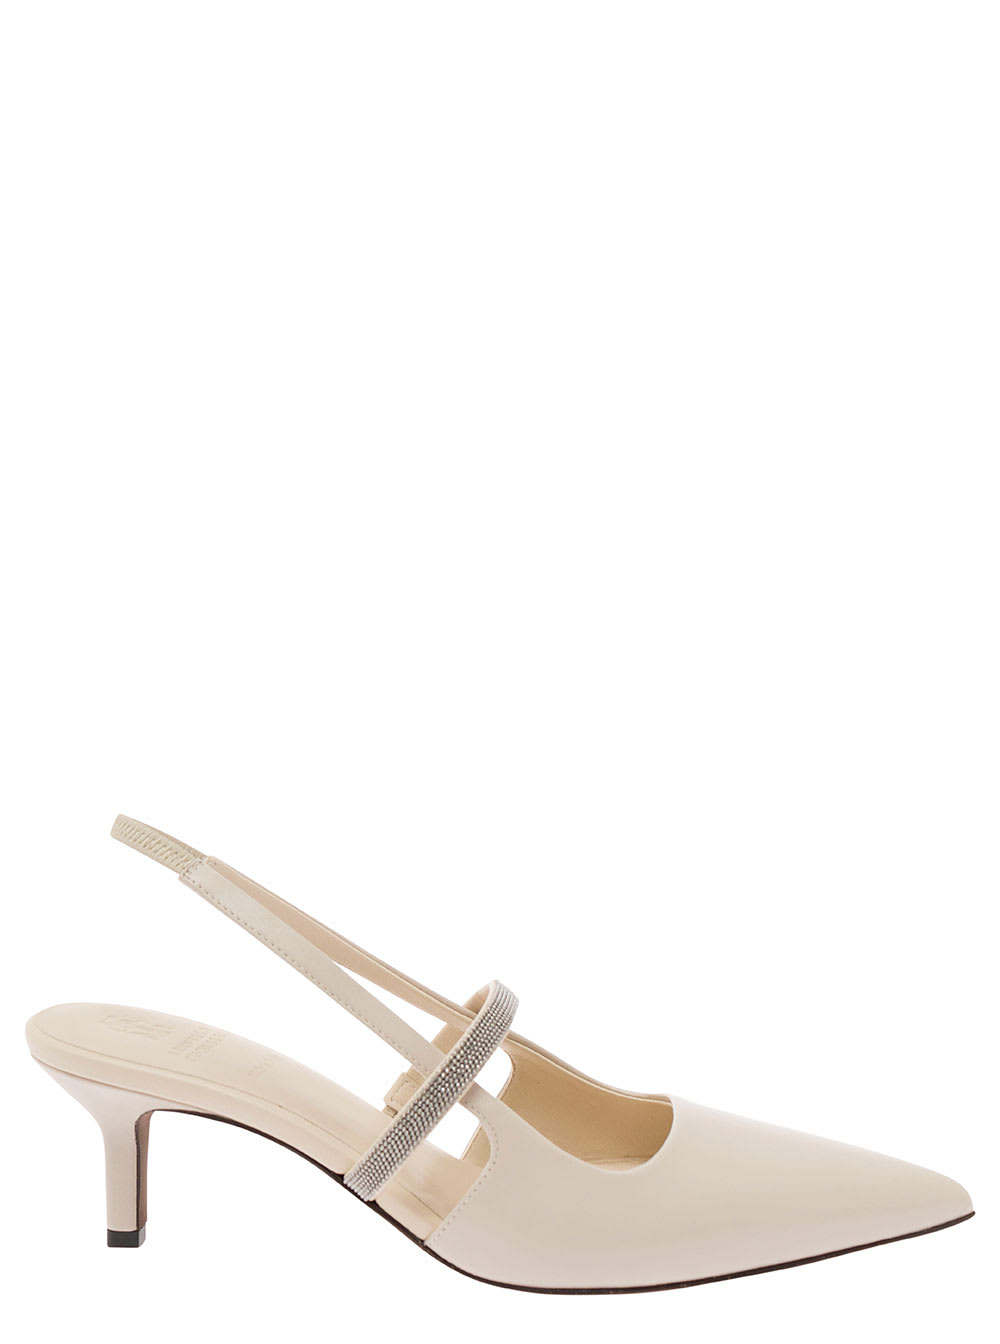 Slingback Pumps With Monile Strap In Leather